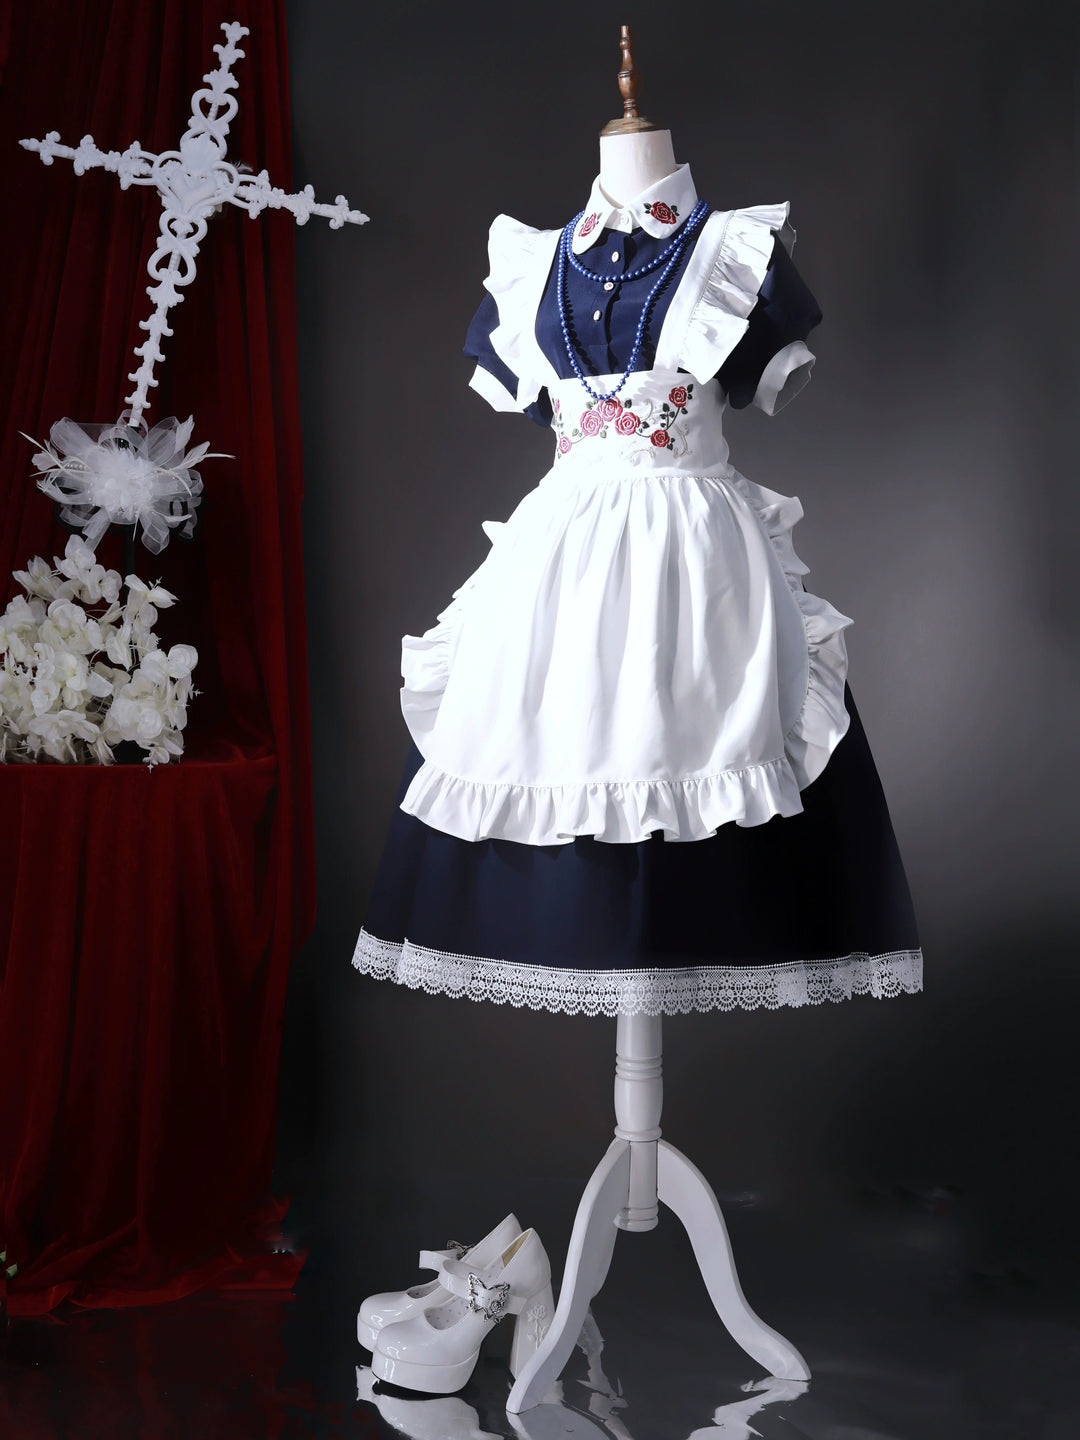 Witch Craft~Posey Nina~Maid Lolita OP Dress Elegant Embroidered Apron Lolita Outfit   